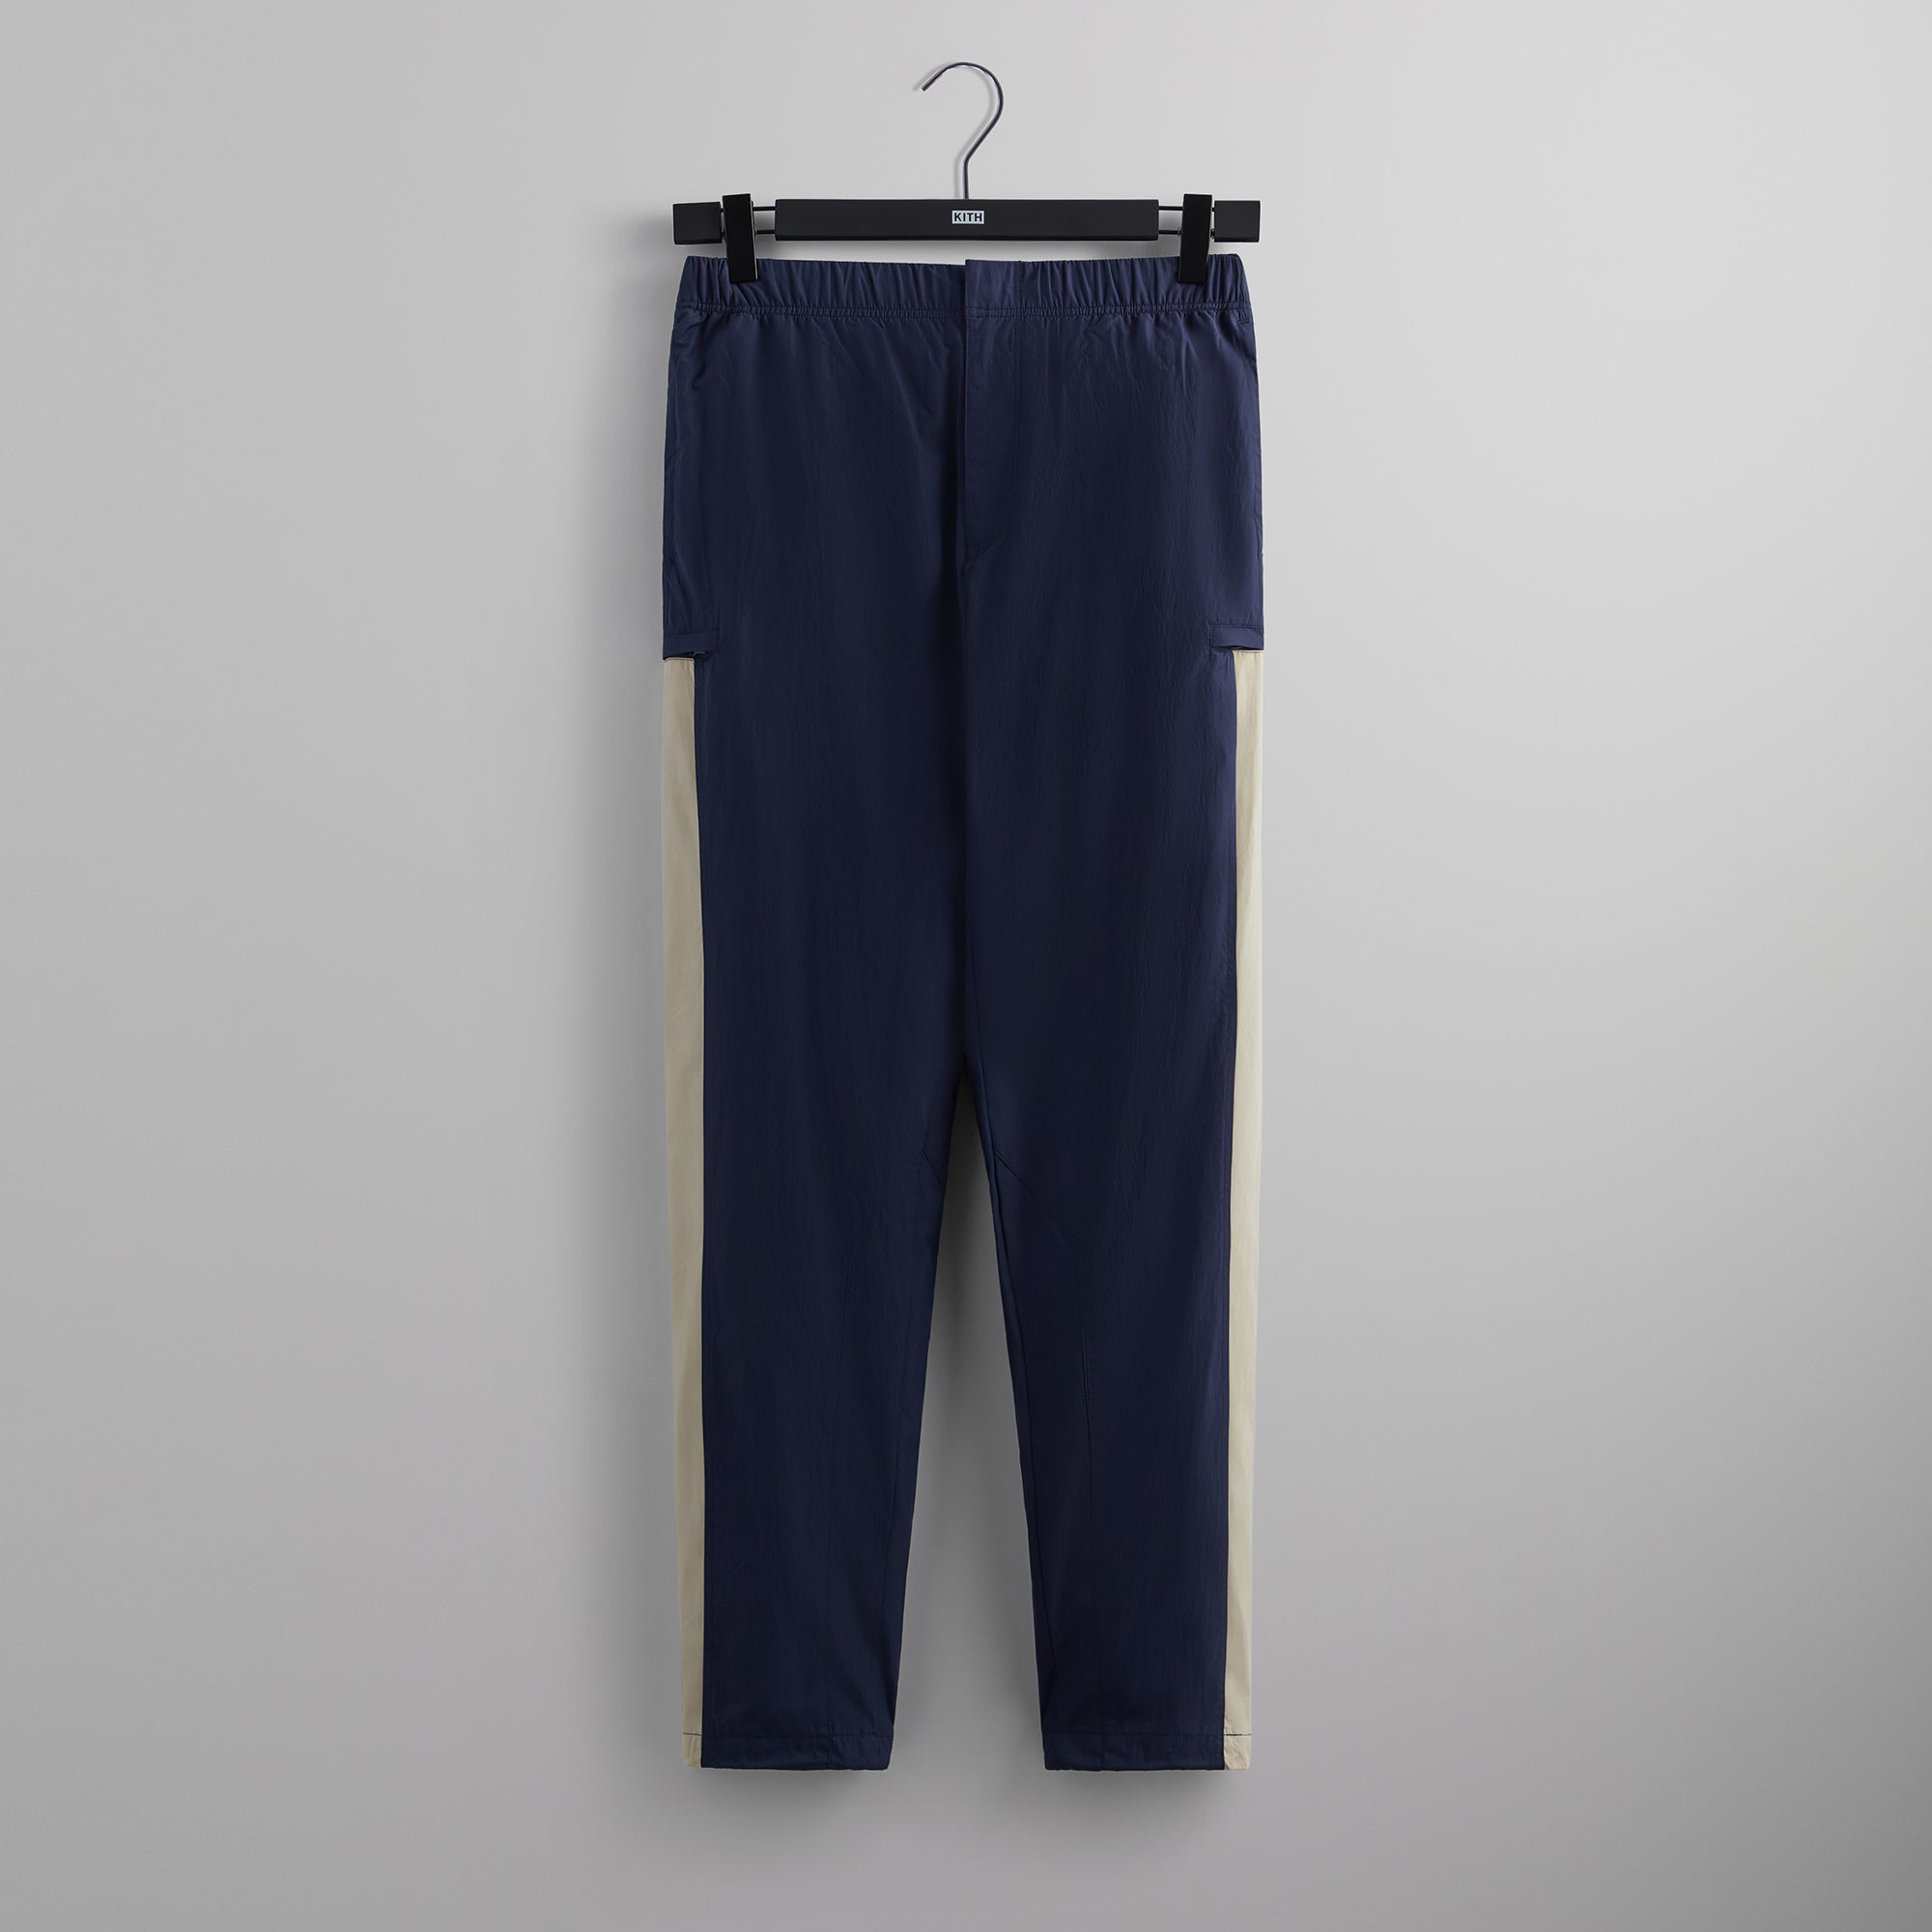 Kith Whitney Track Pant - Nocturnal